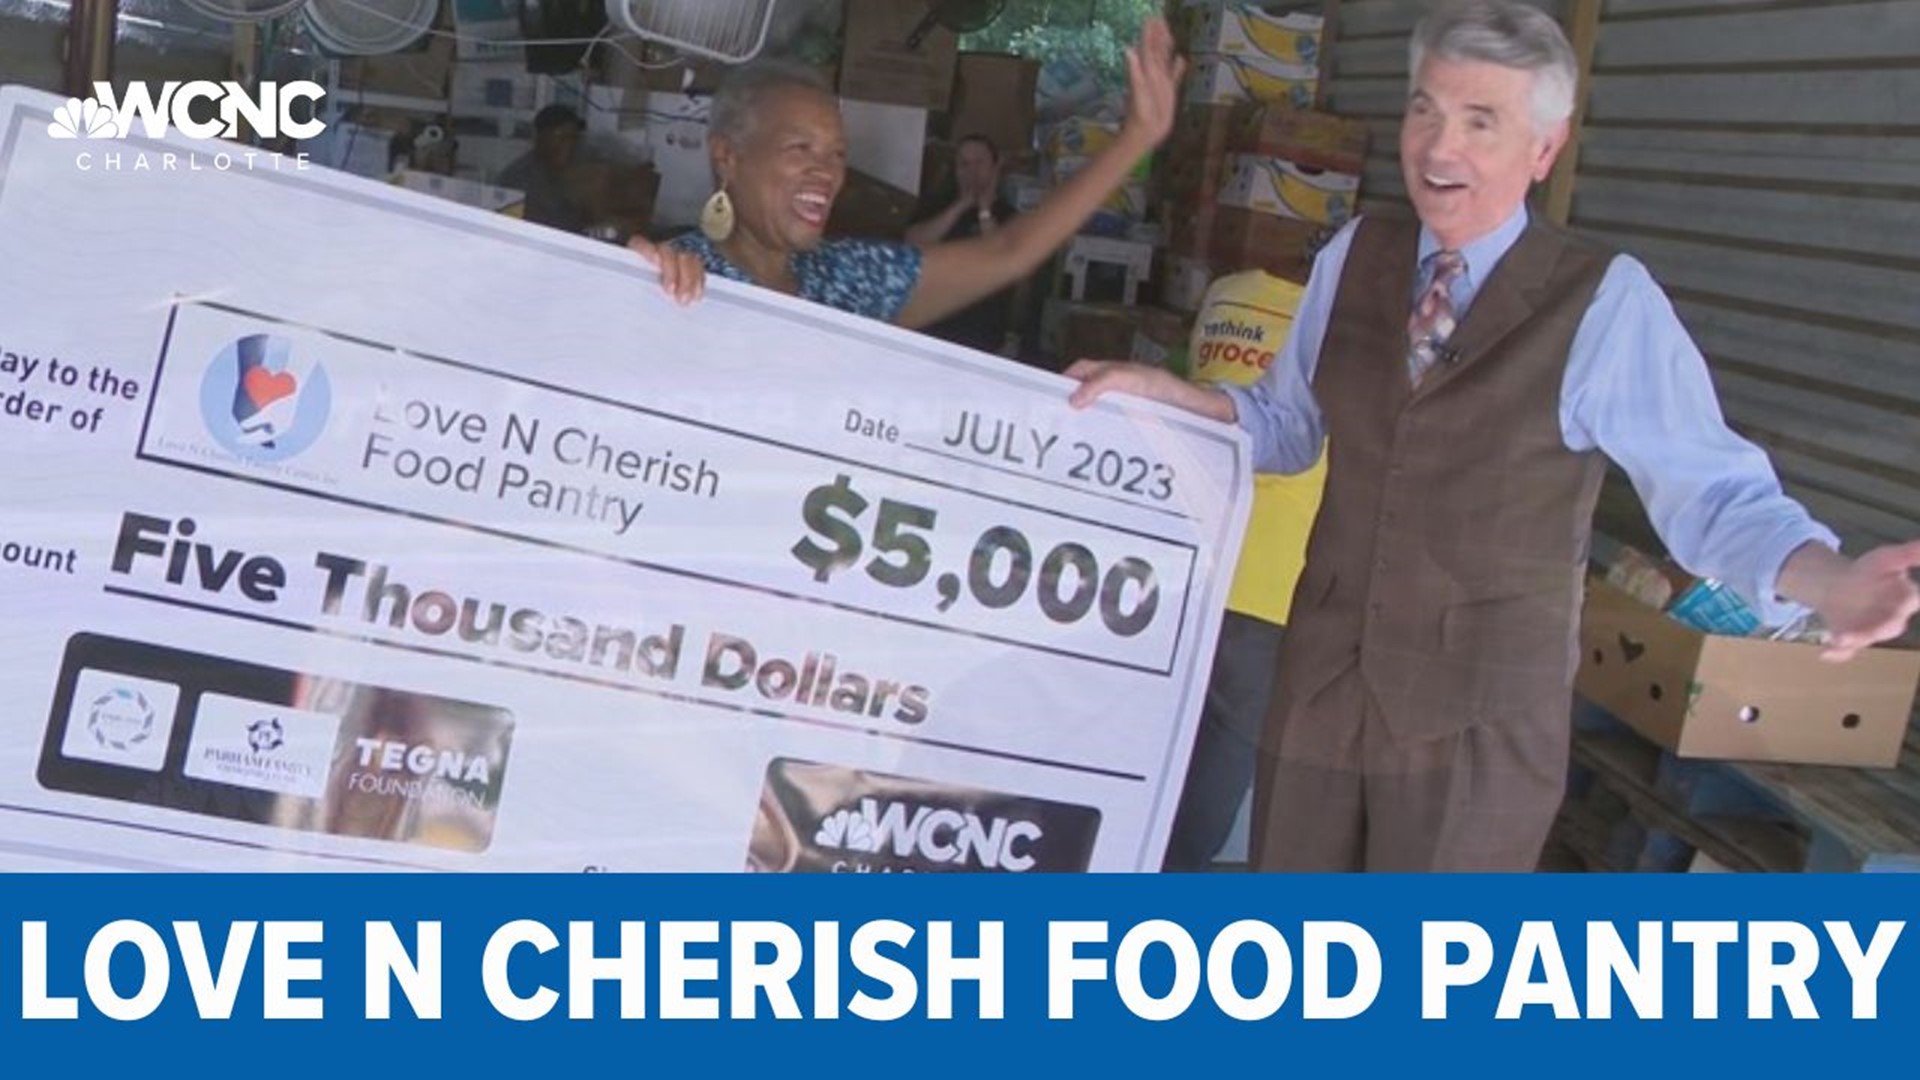 This month we are working with the Love N Cherish food pantry in York County, South Carolina